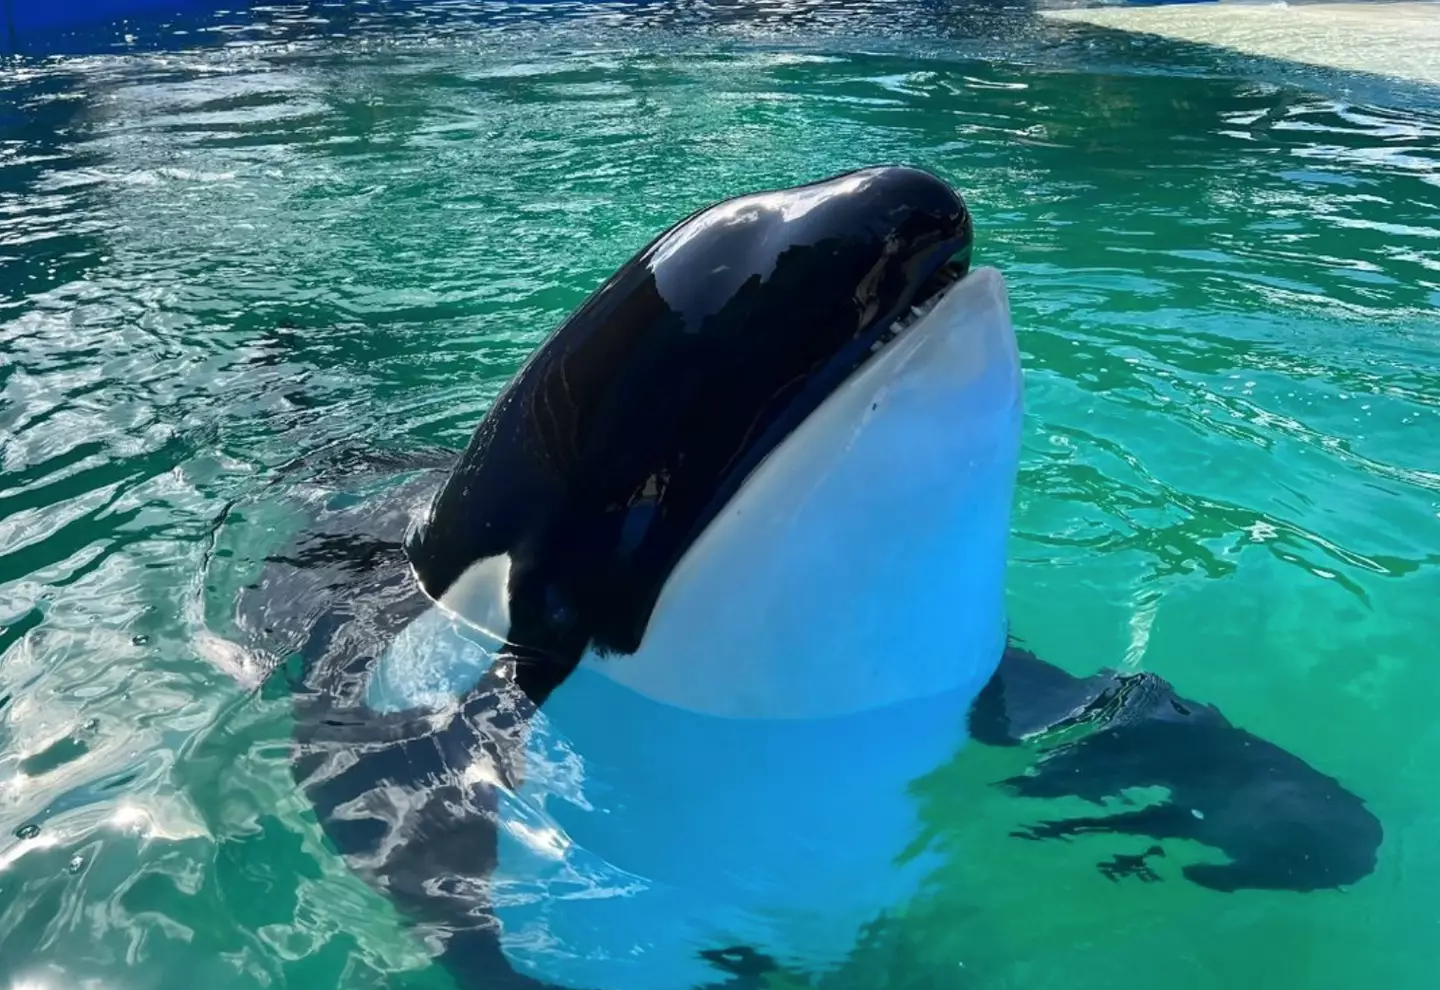 Lolita the orca has died aged 57.